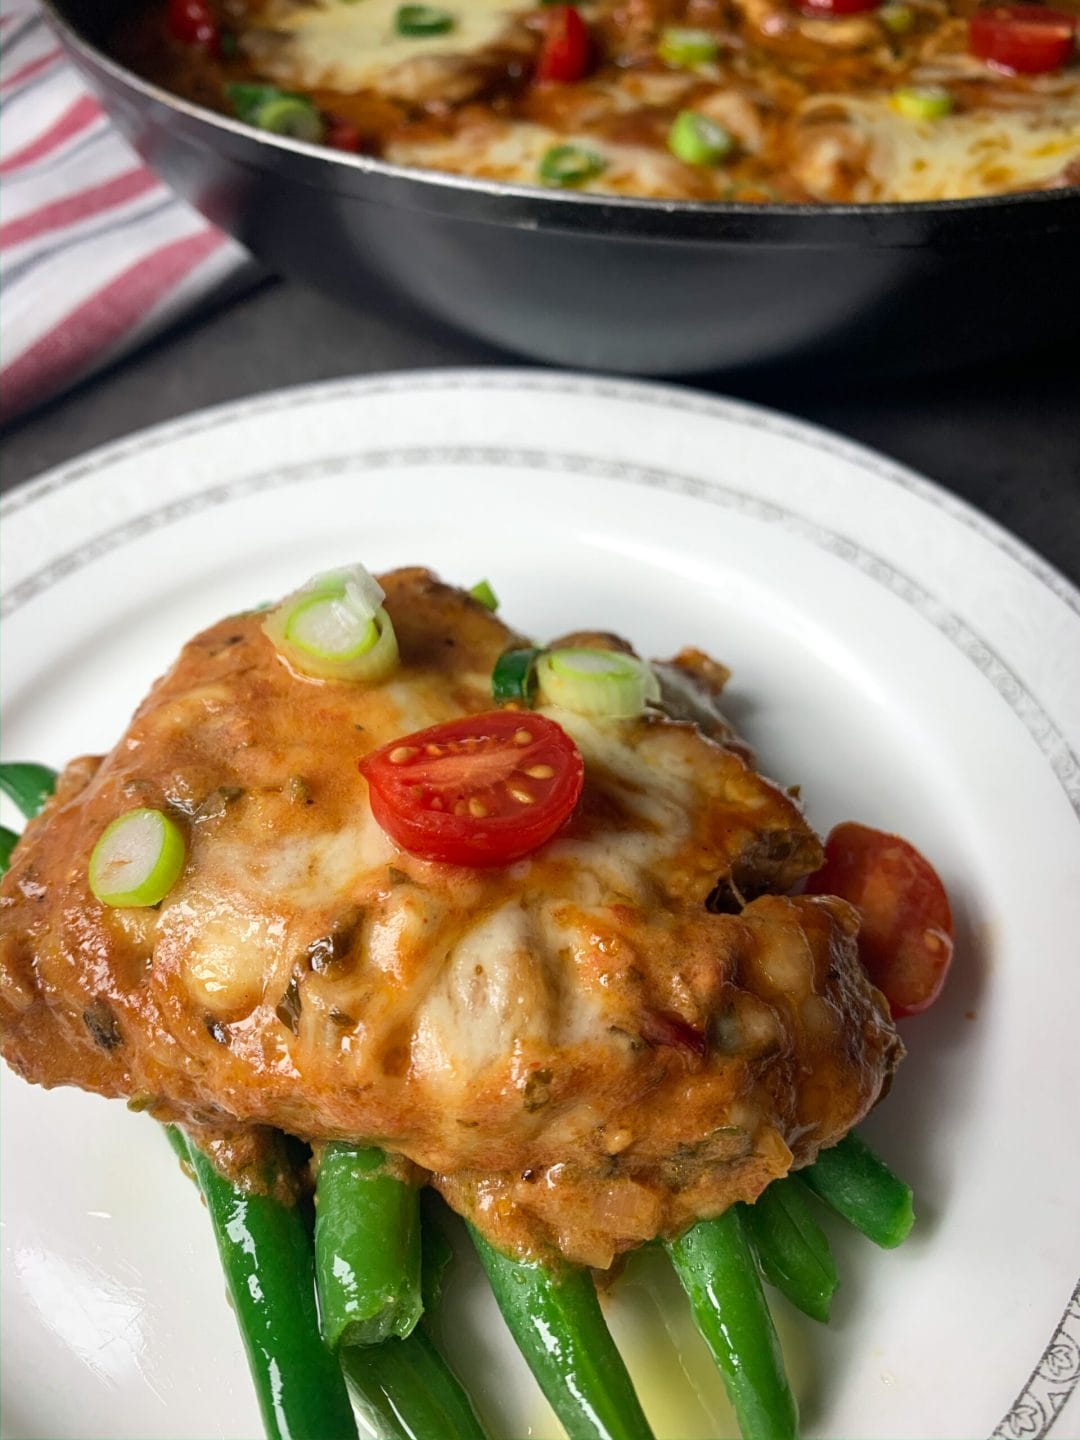 Picture of a plate with green beans and pork neck with melted cheese on top